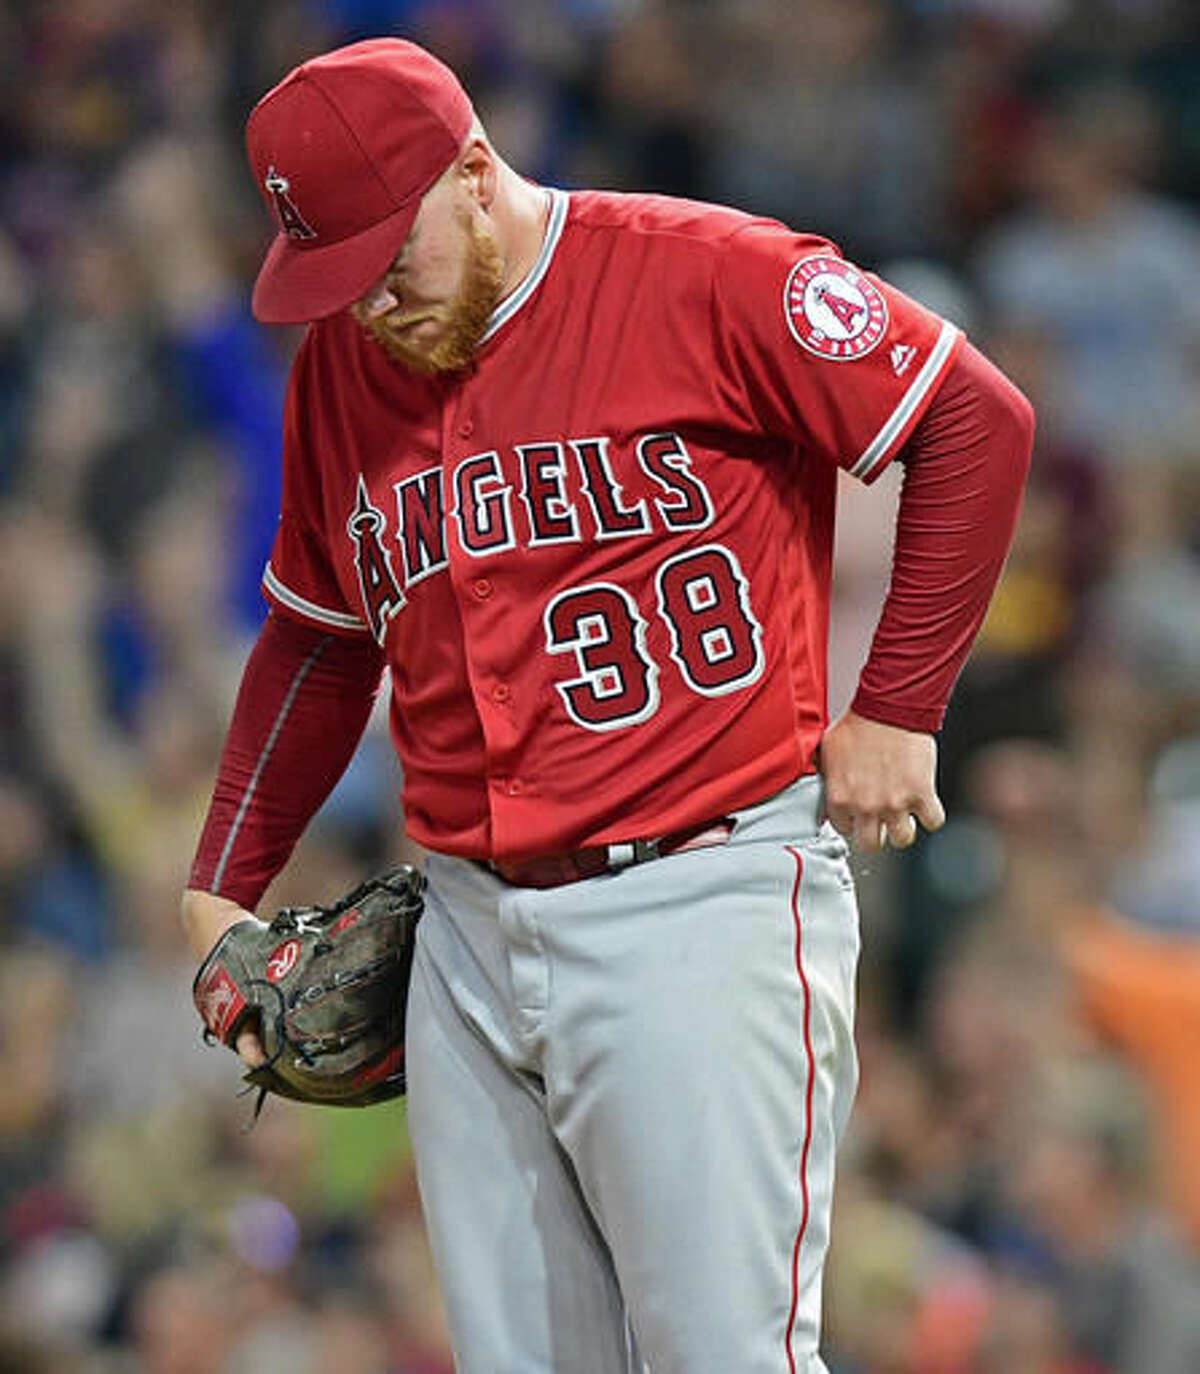 Los Angeles Angels relief pitcher Brett Oberholtzer hangs his head after a three-run home run by Cleveland Indians' Mike Napoli during the fifth inning of a baseball game, Thursday, Aug. 11, 2016, in Cleveland. (AP Photo/David Dermer)